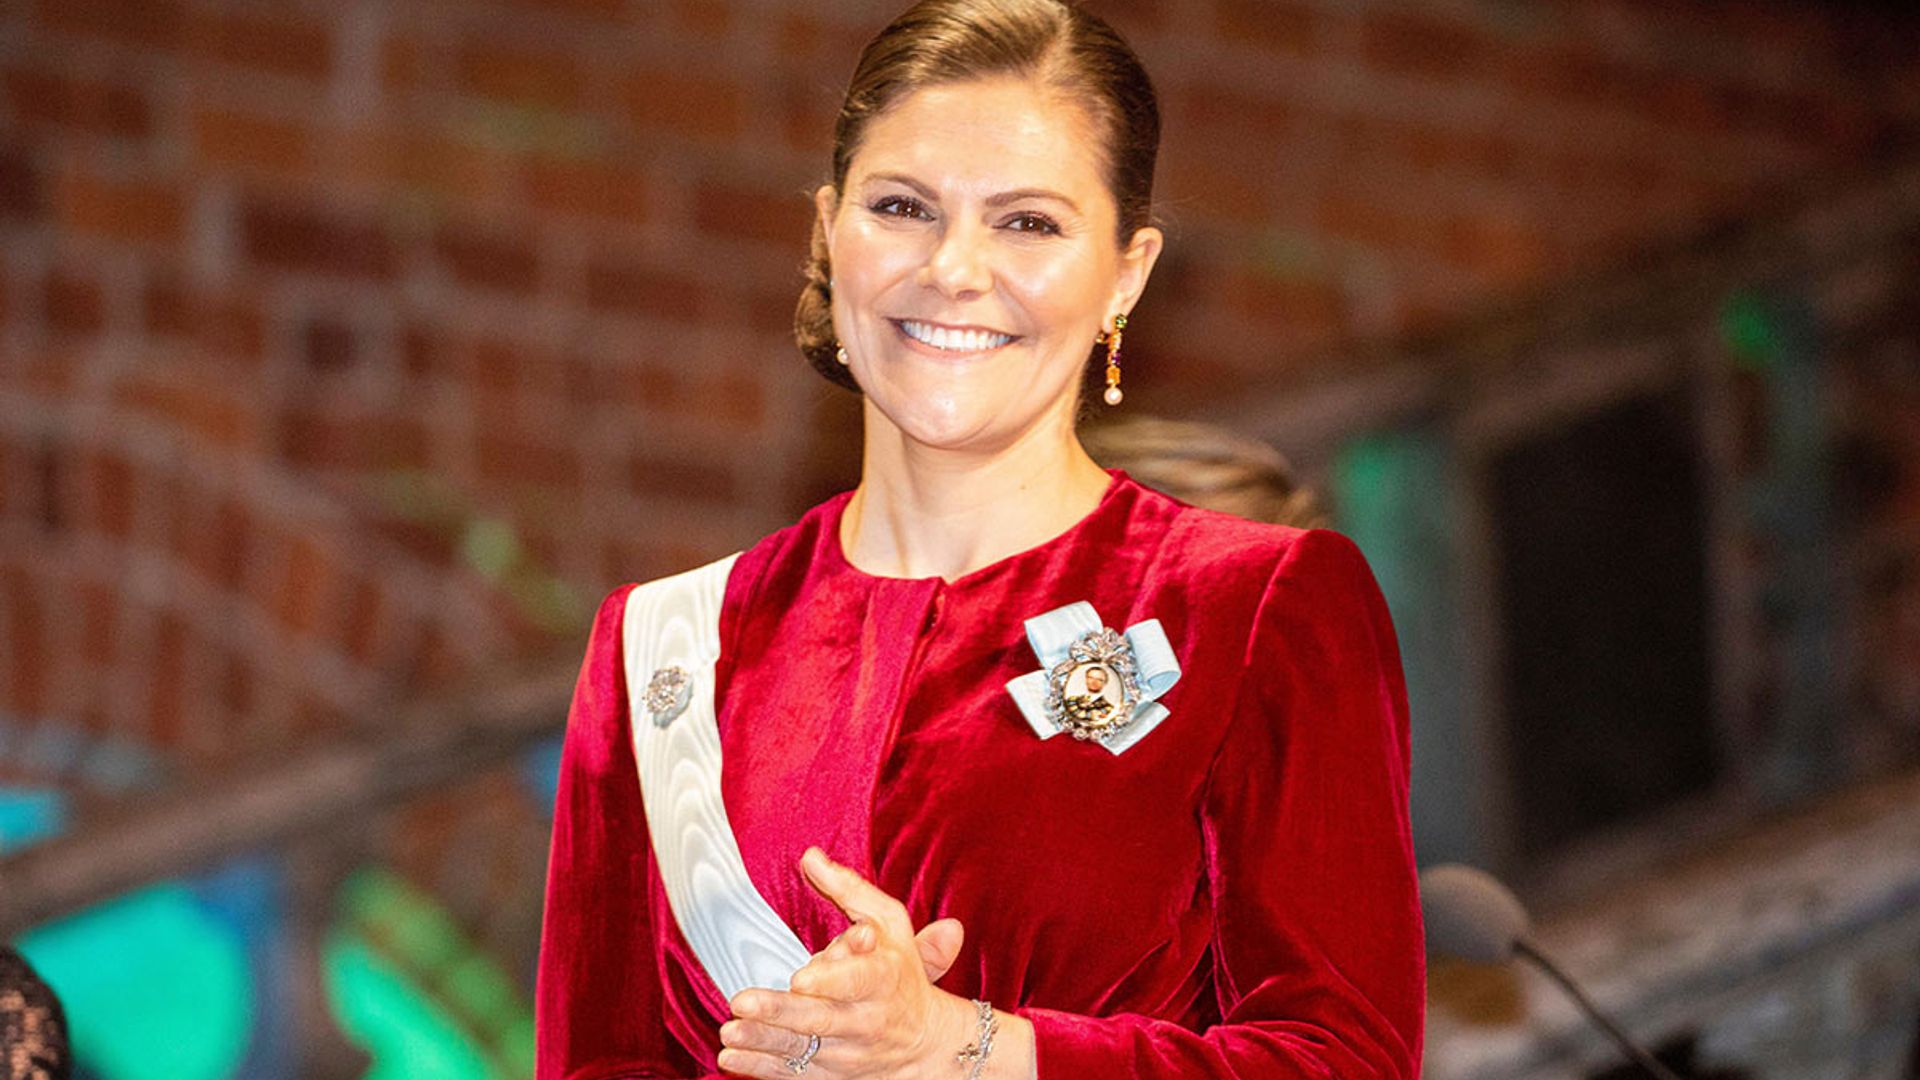 Lady in red! Crown Princess Victoria dazzles at Stockholm banquet in regal red gown